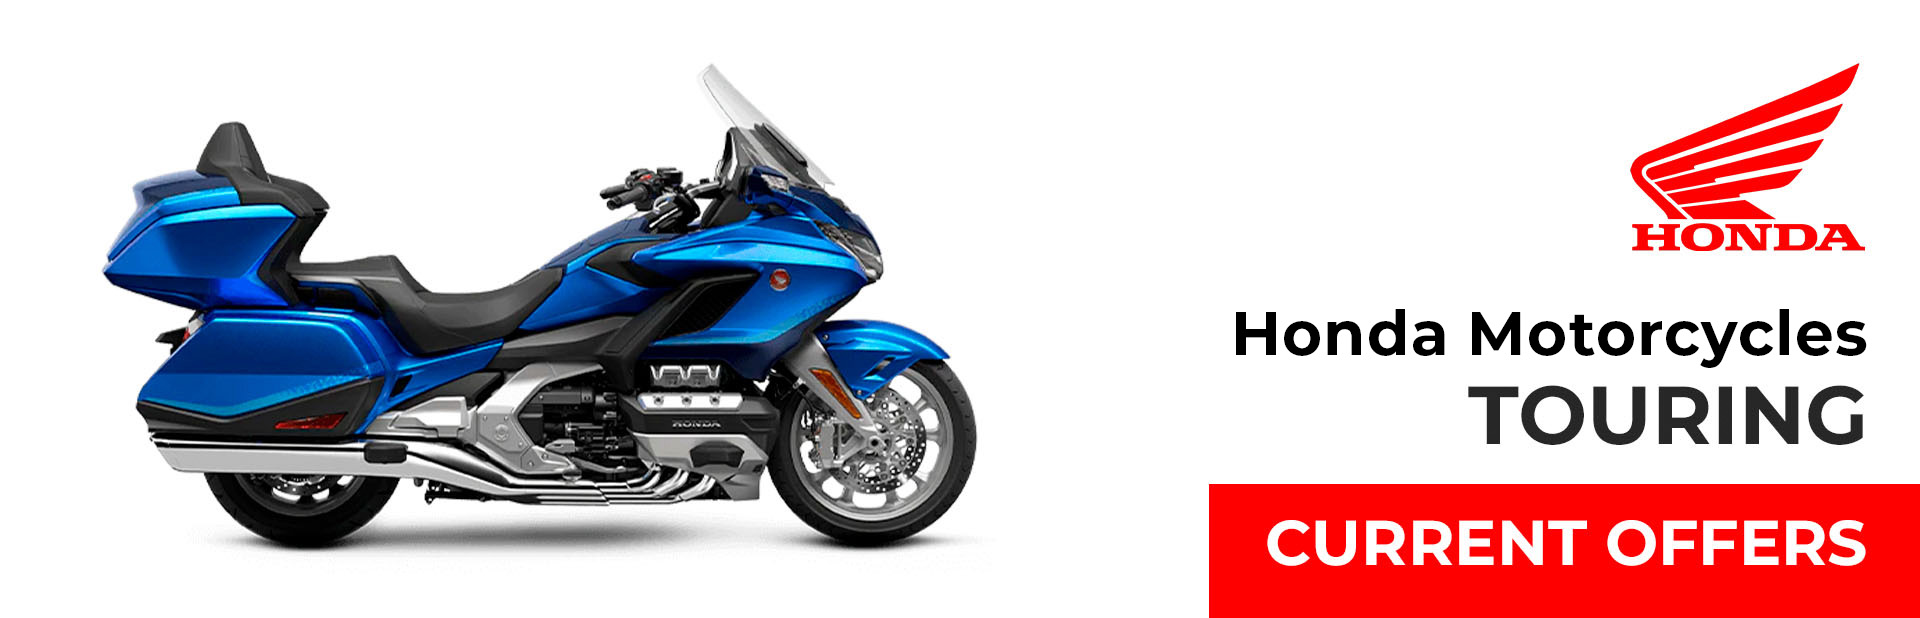 Honda Motorycles: Touring Current Offers